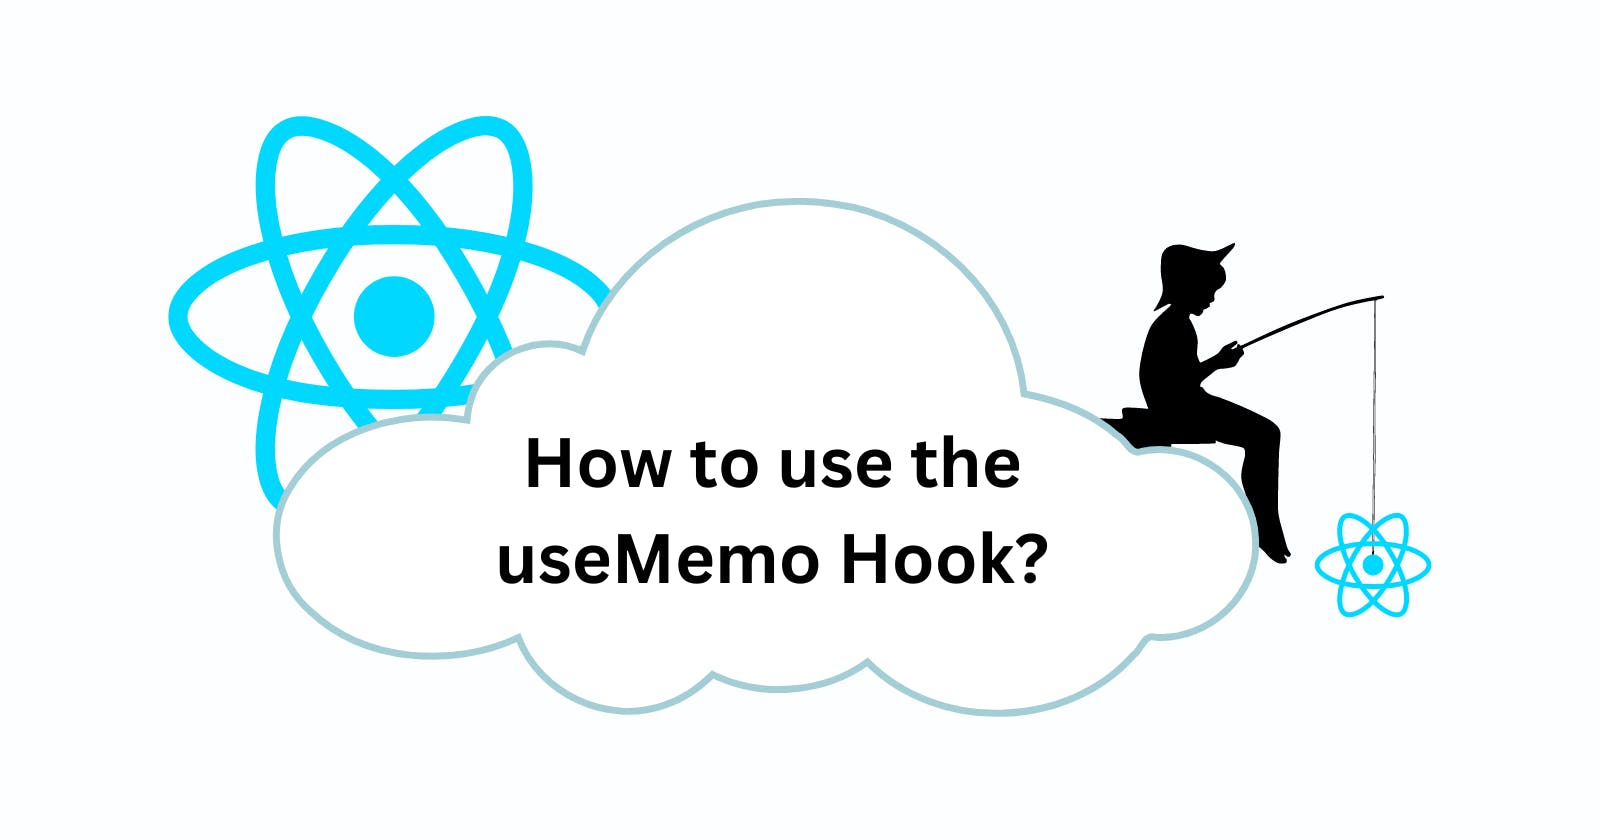 How to use useMemo Hook in React?